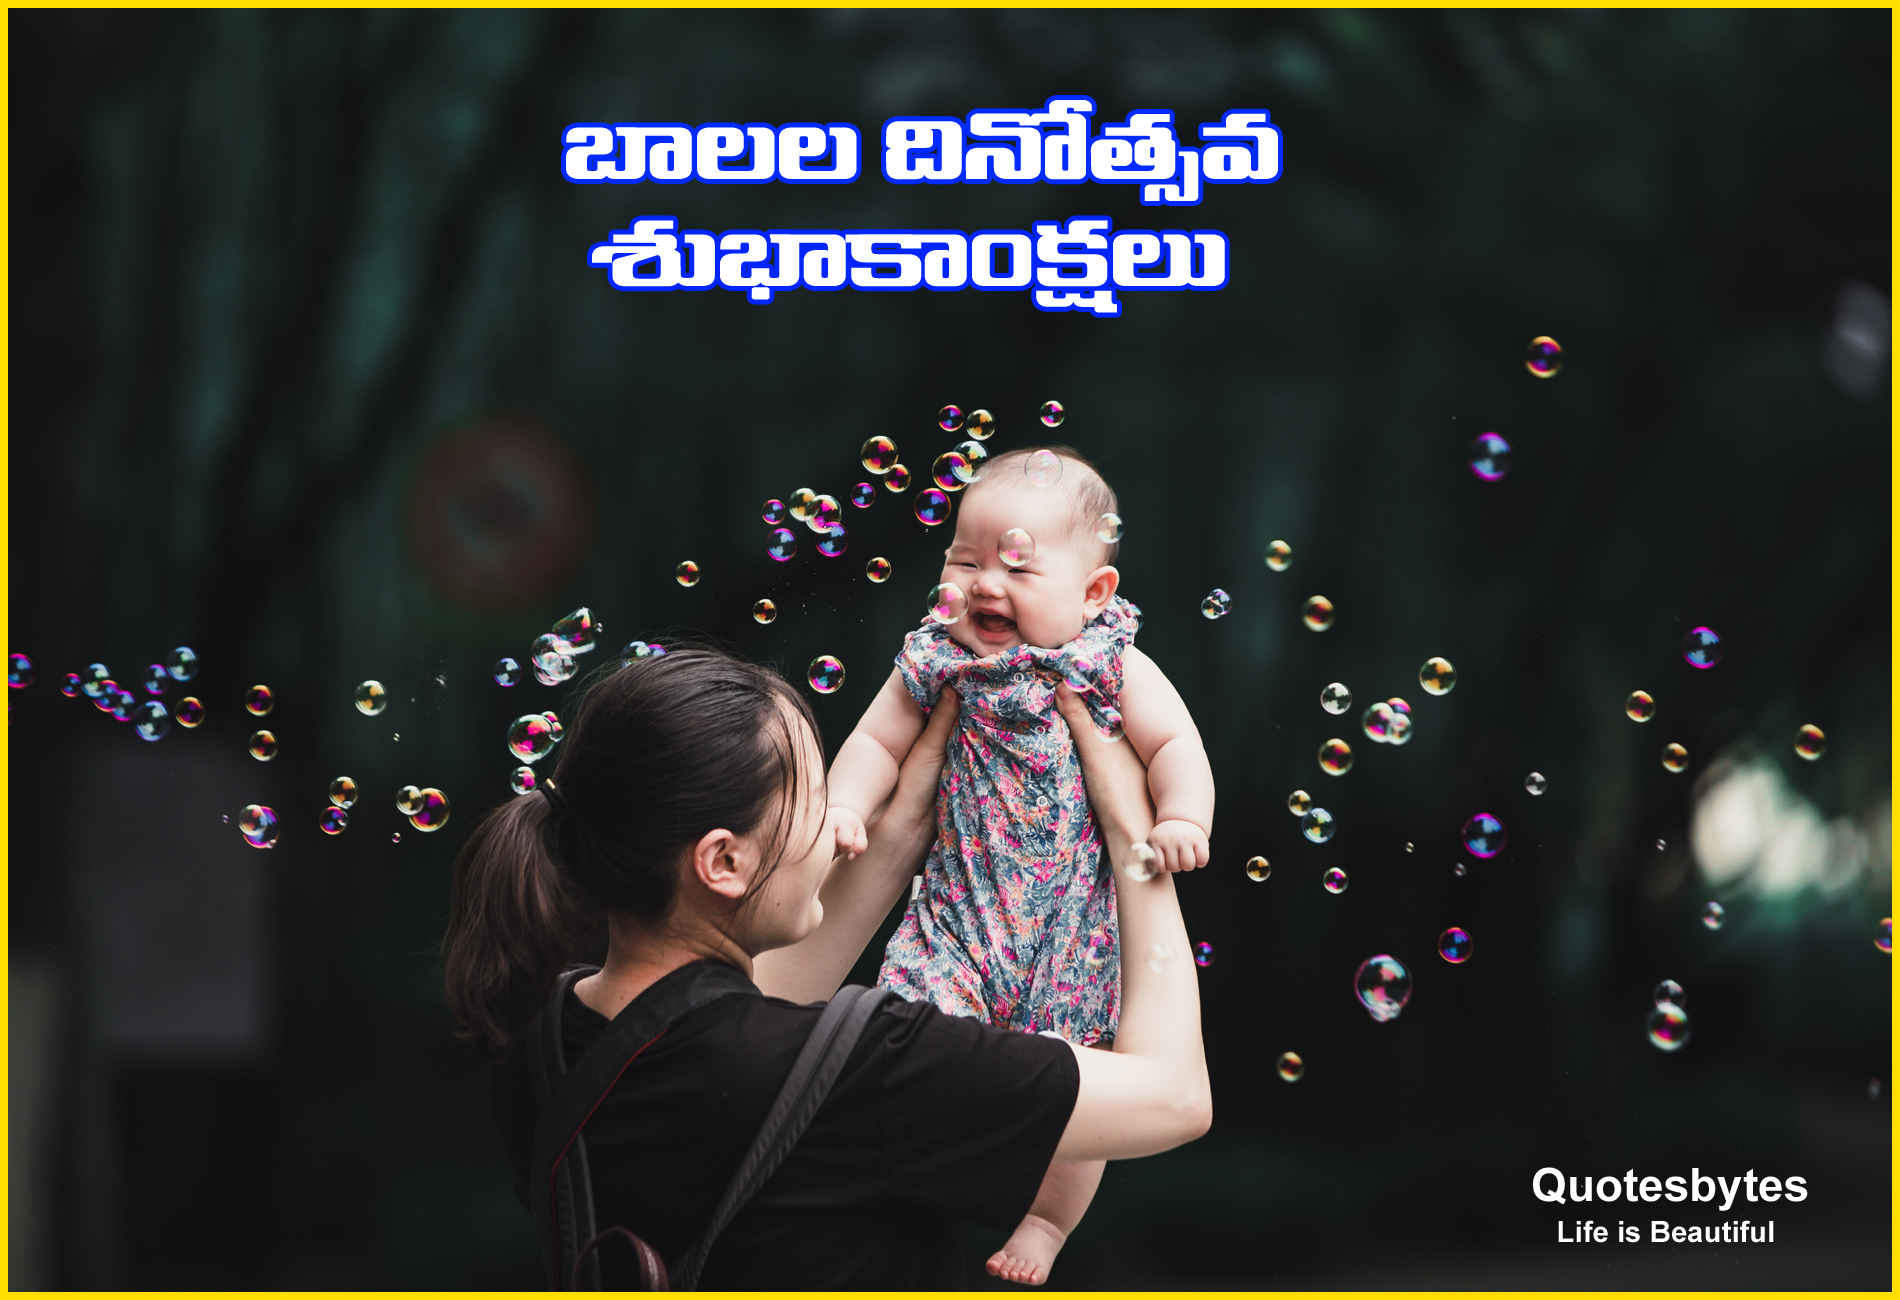 Happy-Children-s-Day-quotes-by-jawaharlal-nehru-Wishes-Images-Quotes-Whatsapp-Messages-Status-Wallpapers-Photos-Cards-and-Pictures